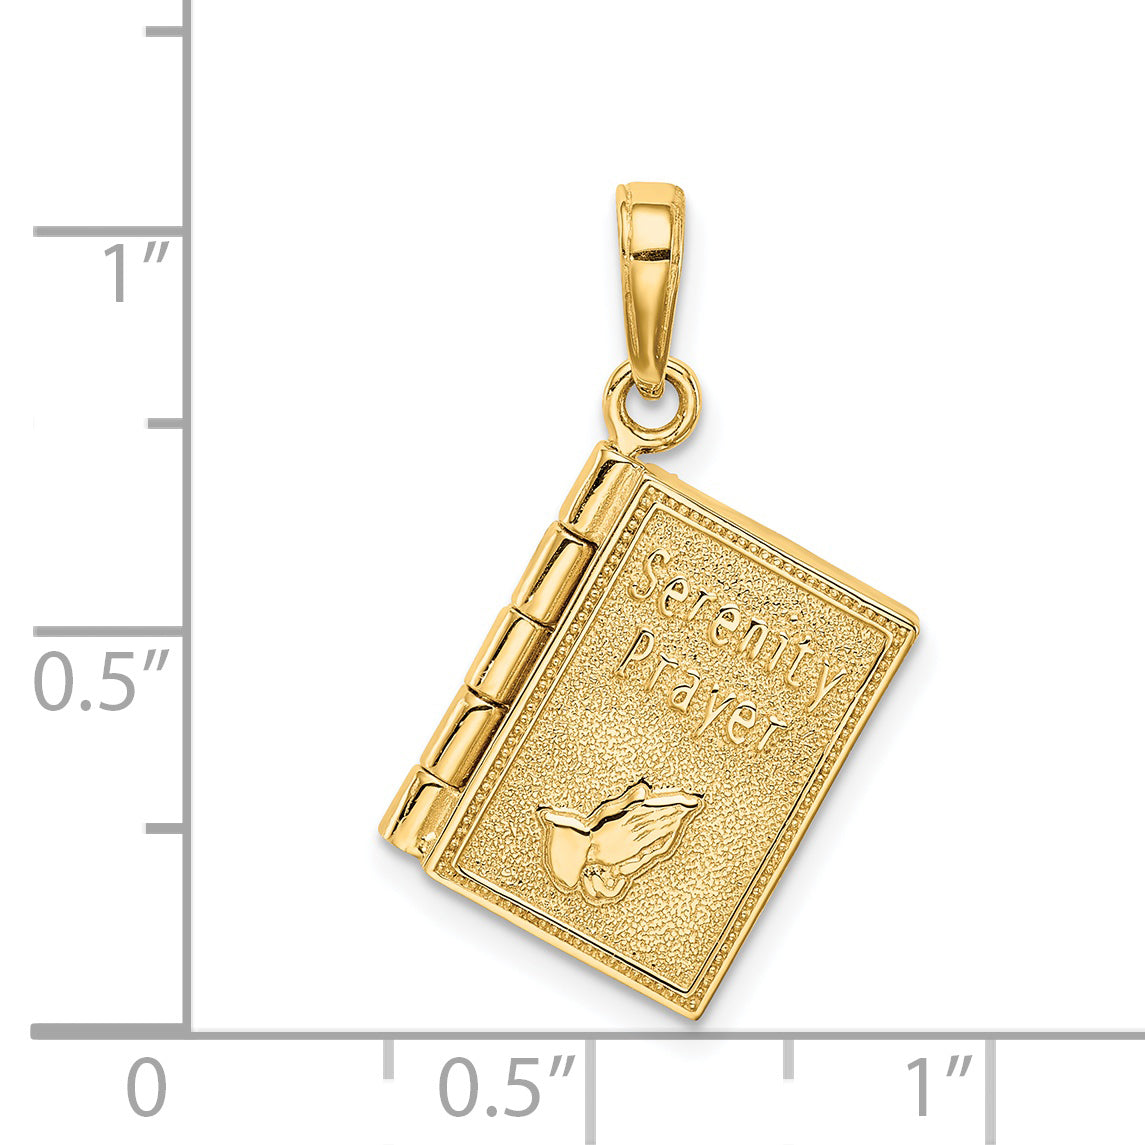 14K 3-D Moveable Pages Serenity Prayer Book Pendant